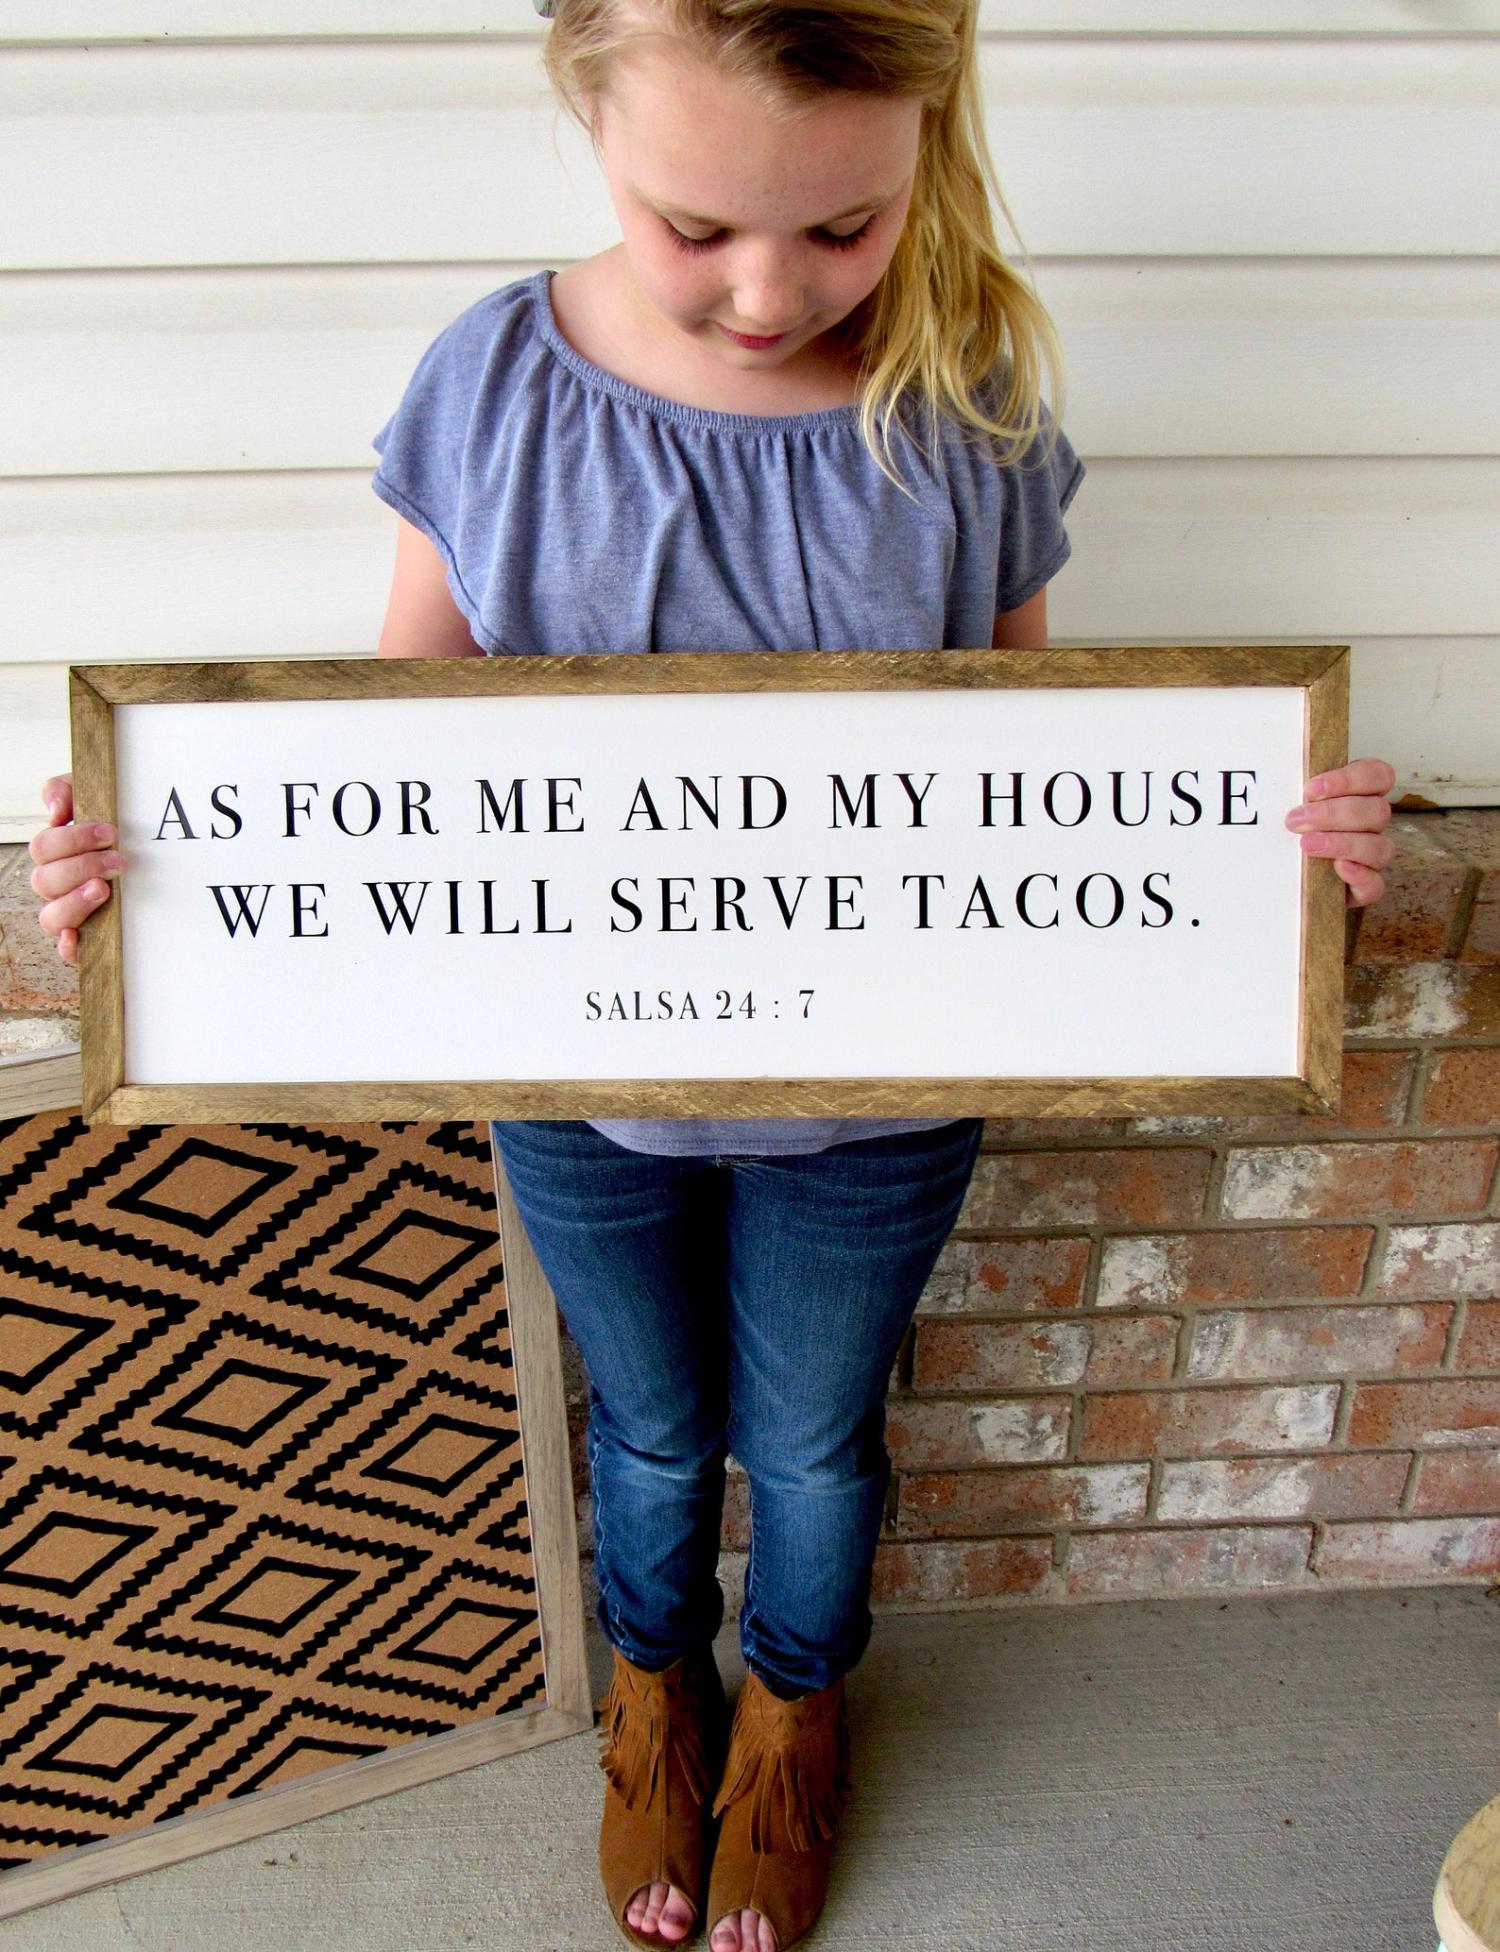 As For Me and My House We Will Serve Tacos - Salsa 24:7